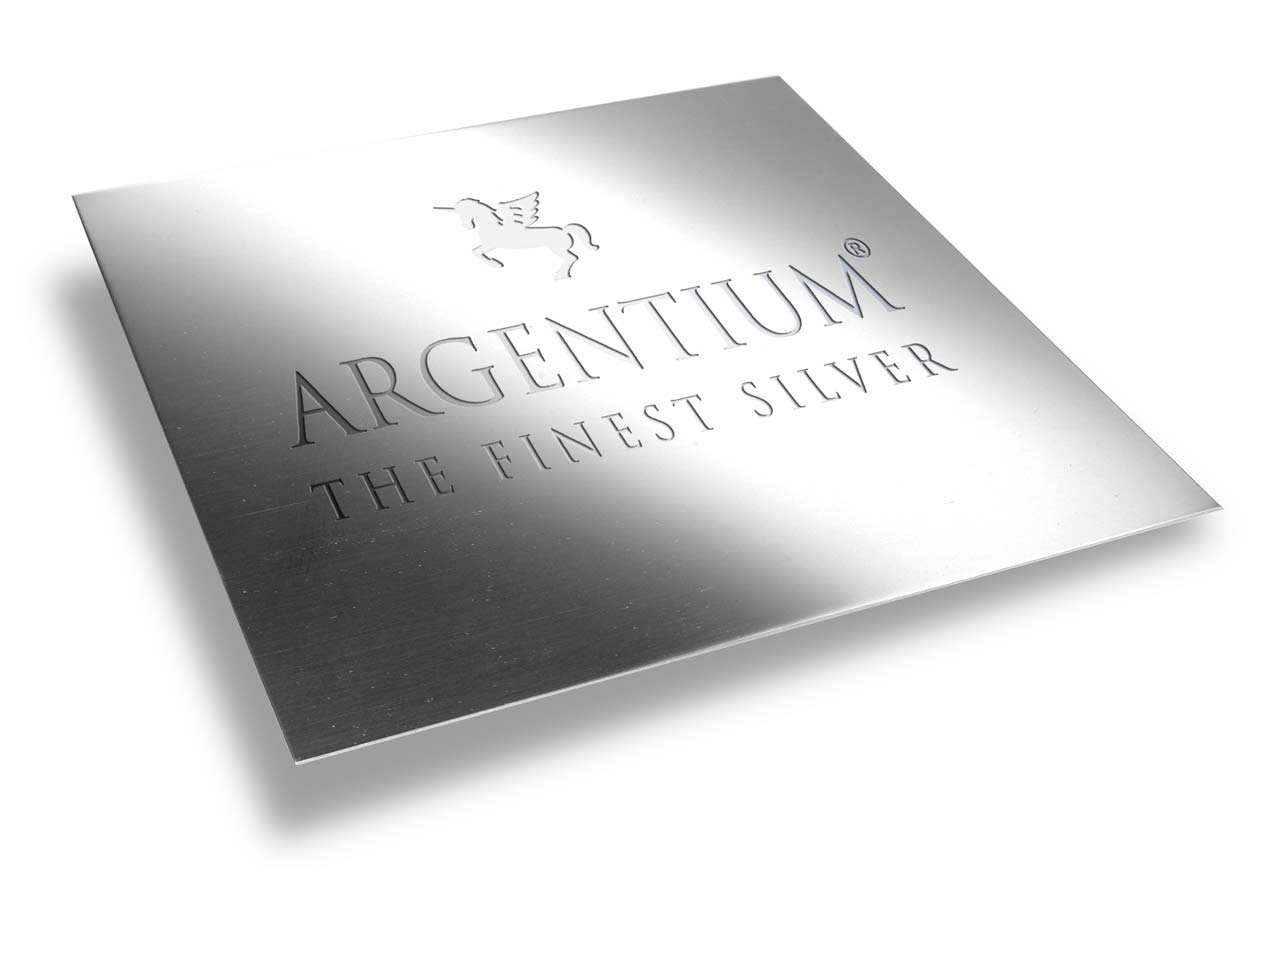 Can Argentium Silver be hallmarked and is there an Argentium mark?